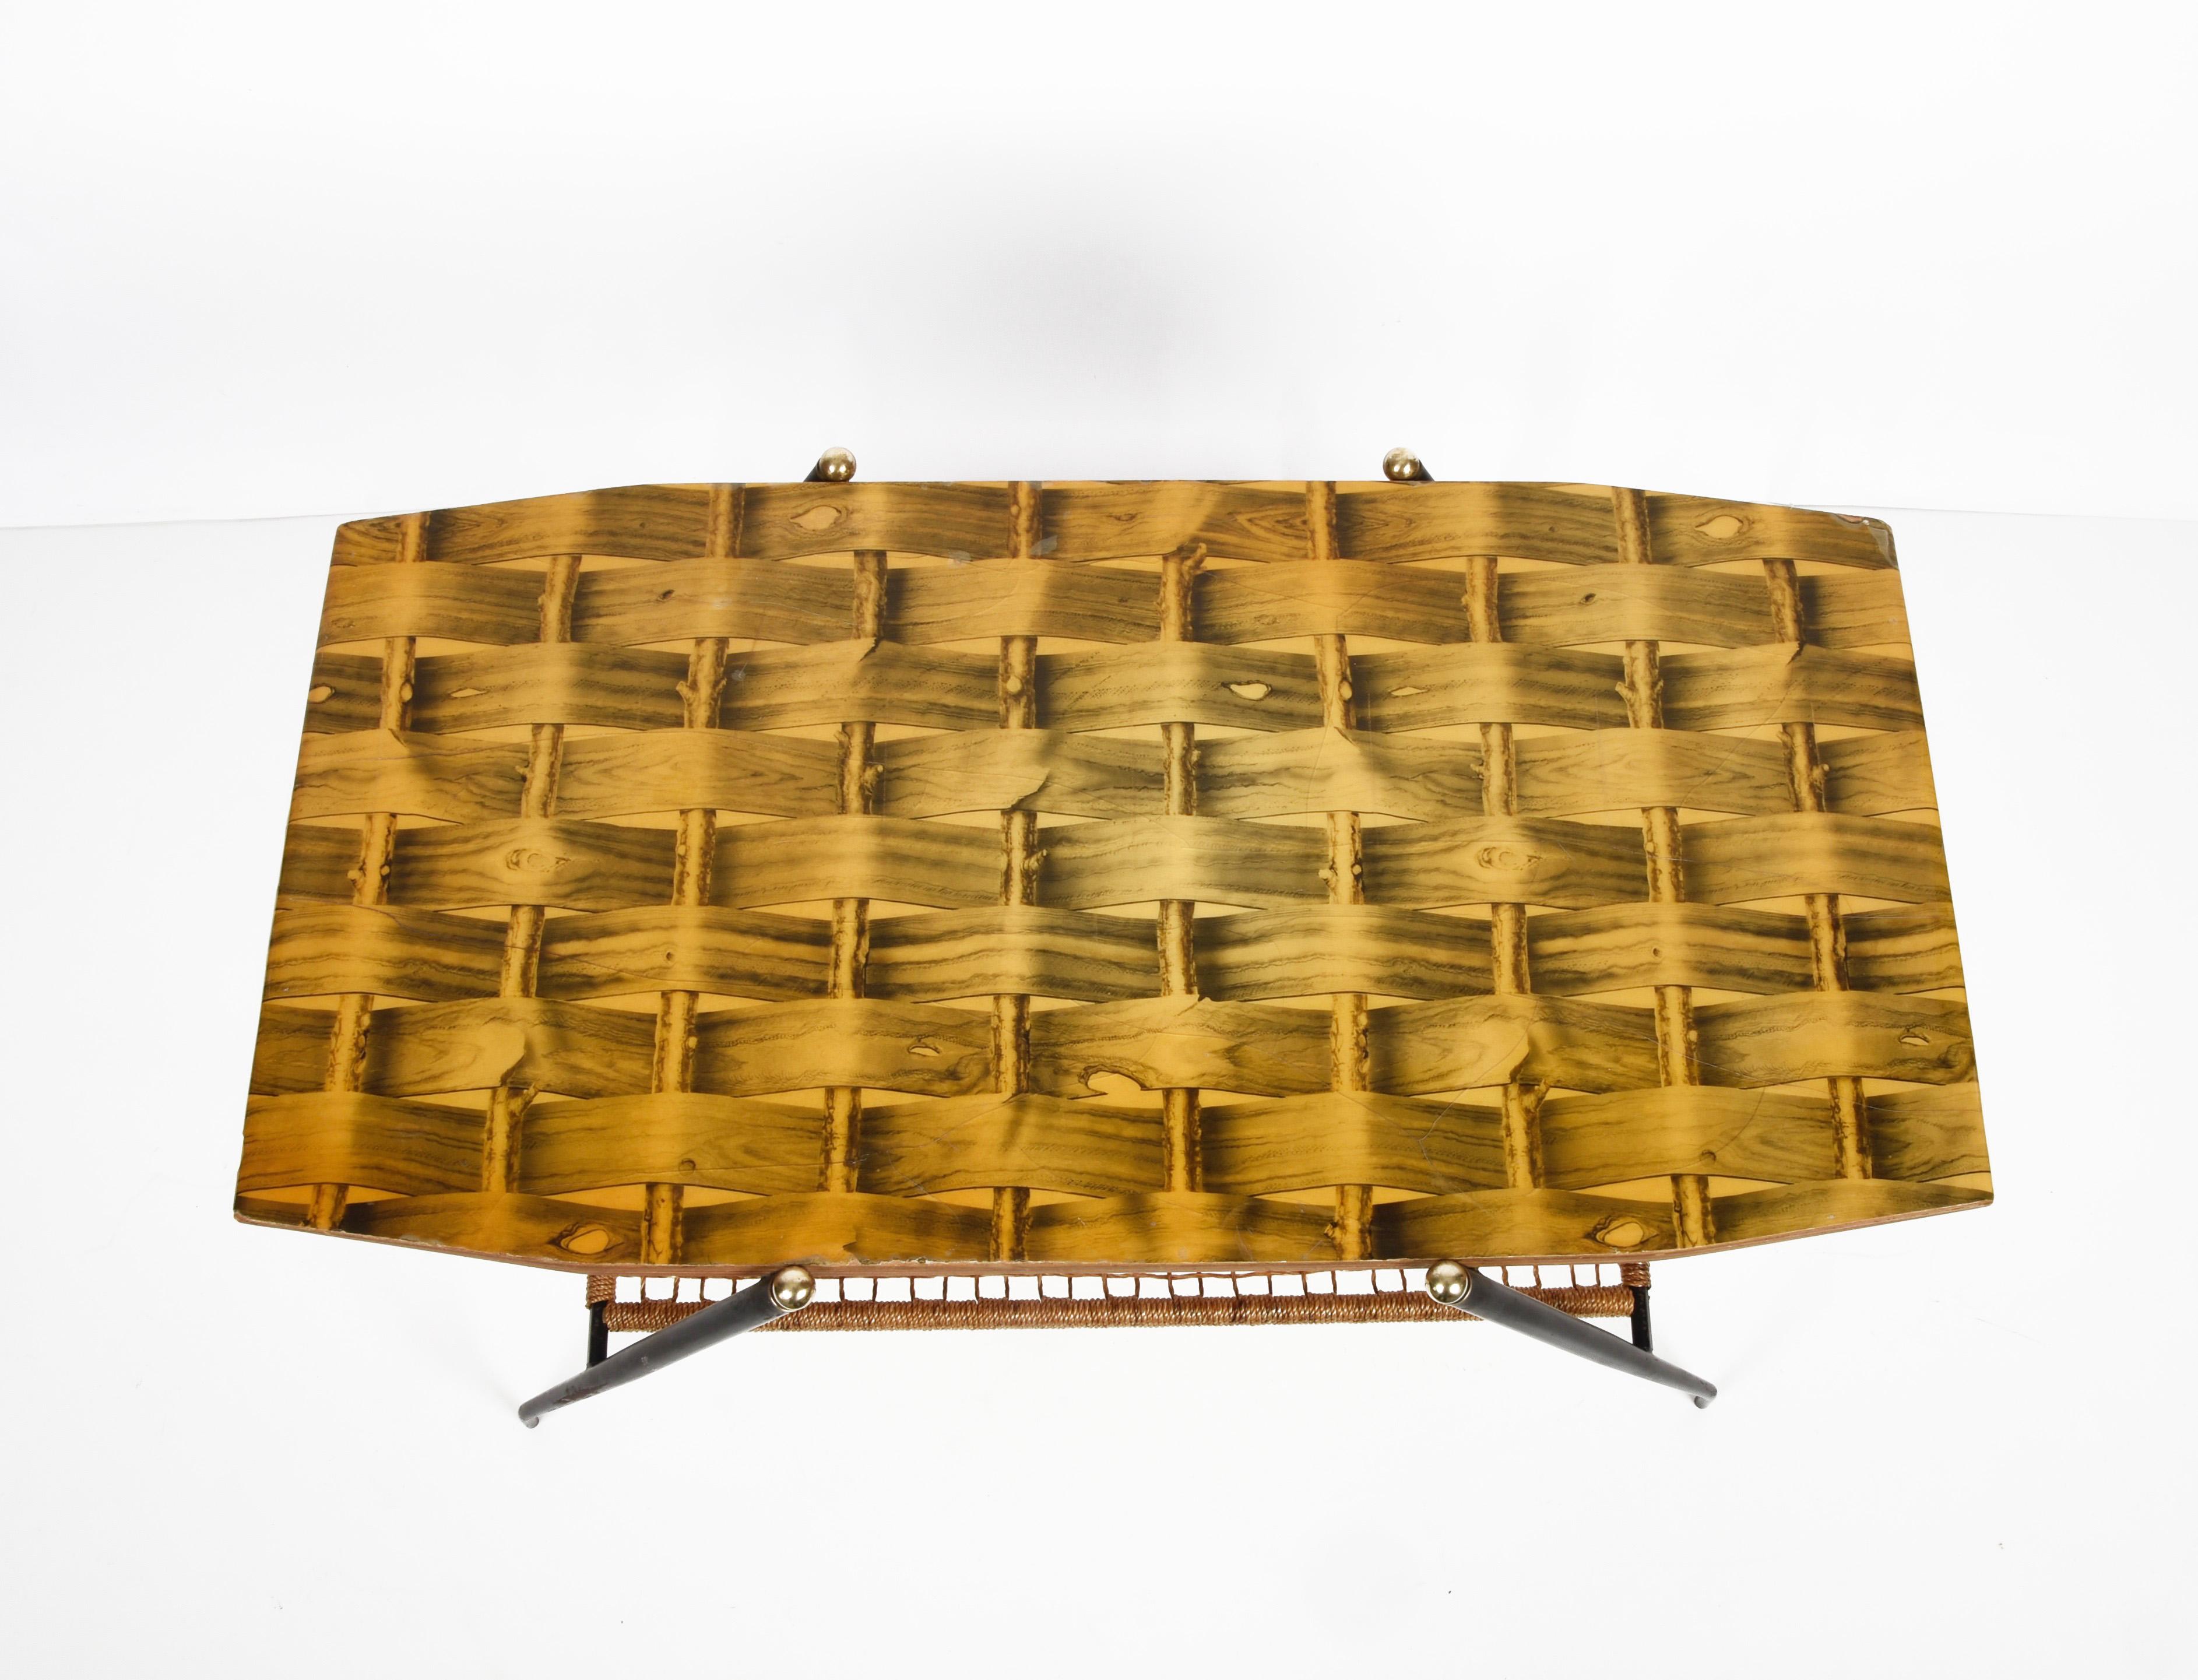 Midcentury Wood and Metal Italian Coffee Table with Brass Magazine Rack, 1950s For Sale 1